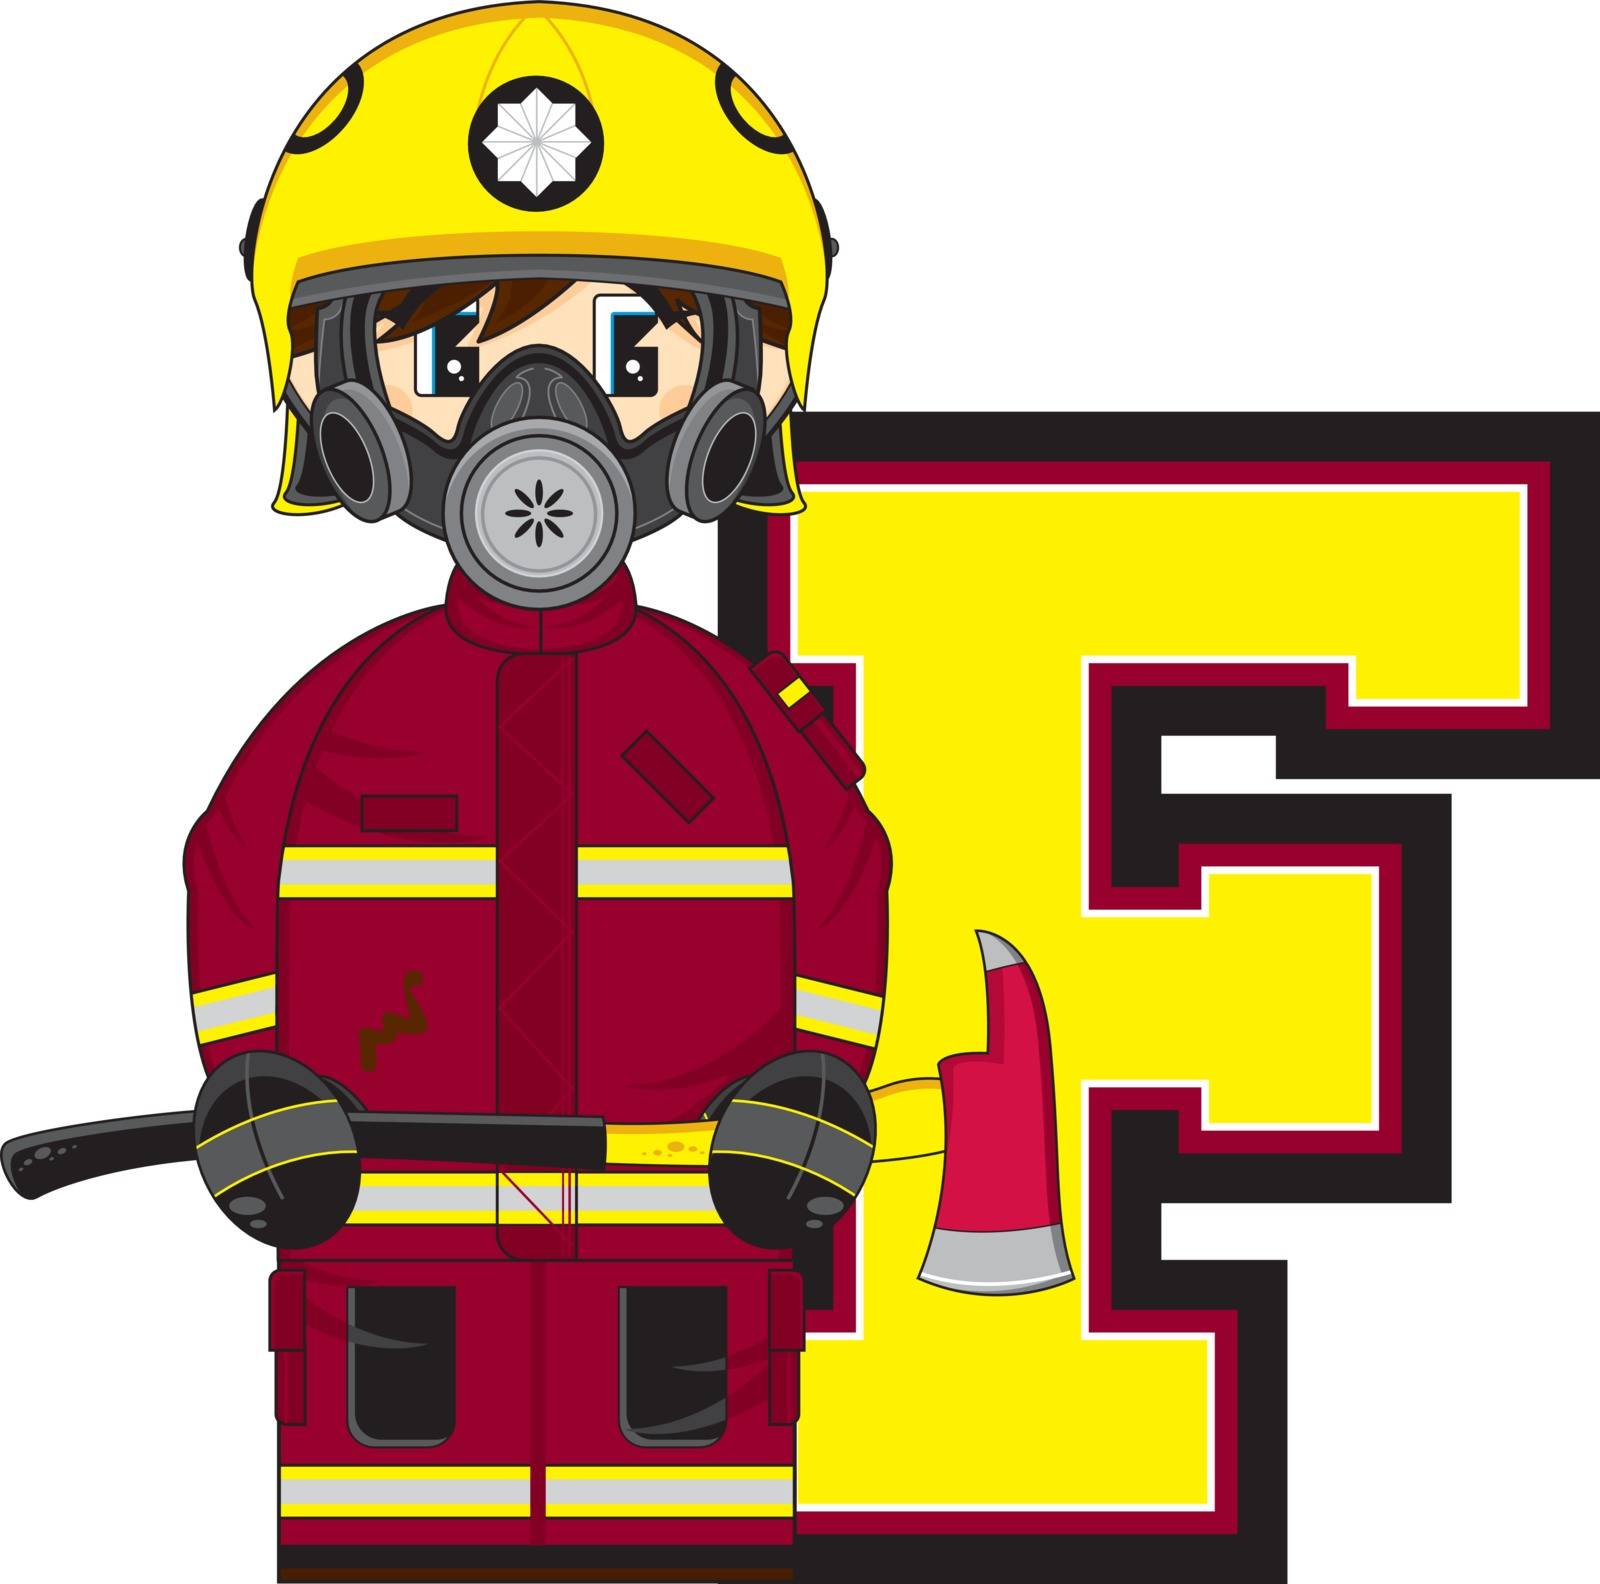 F is for Fireman Alphabet Learning Vector Illustration by Mark Murphy Creative